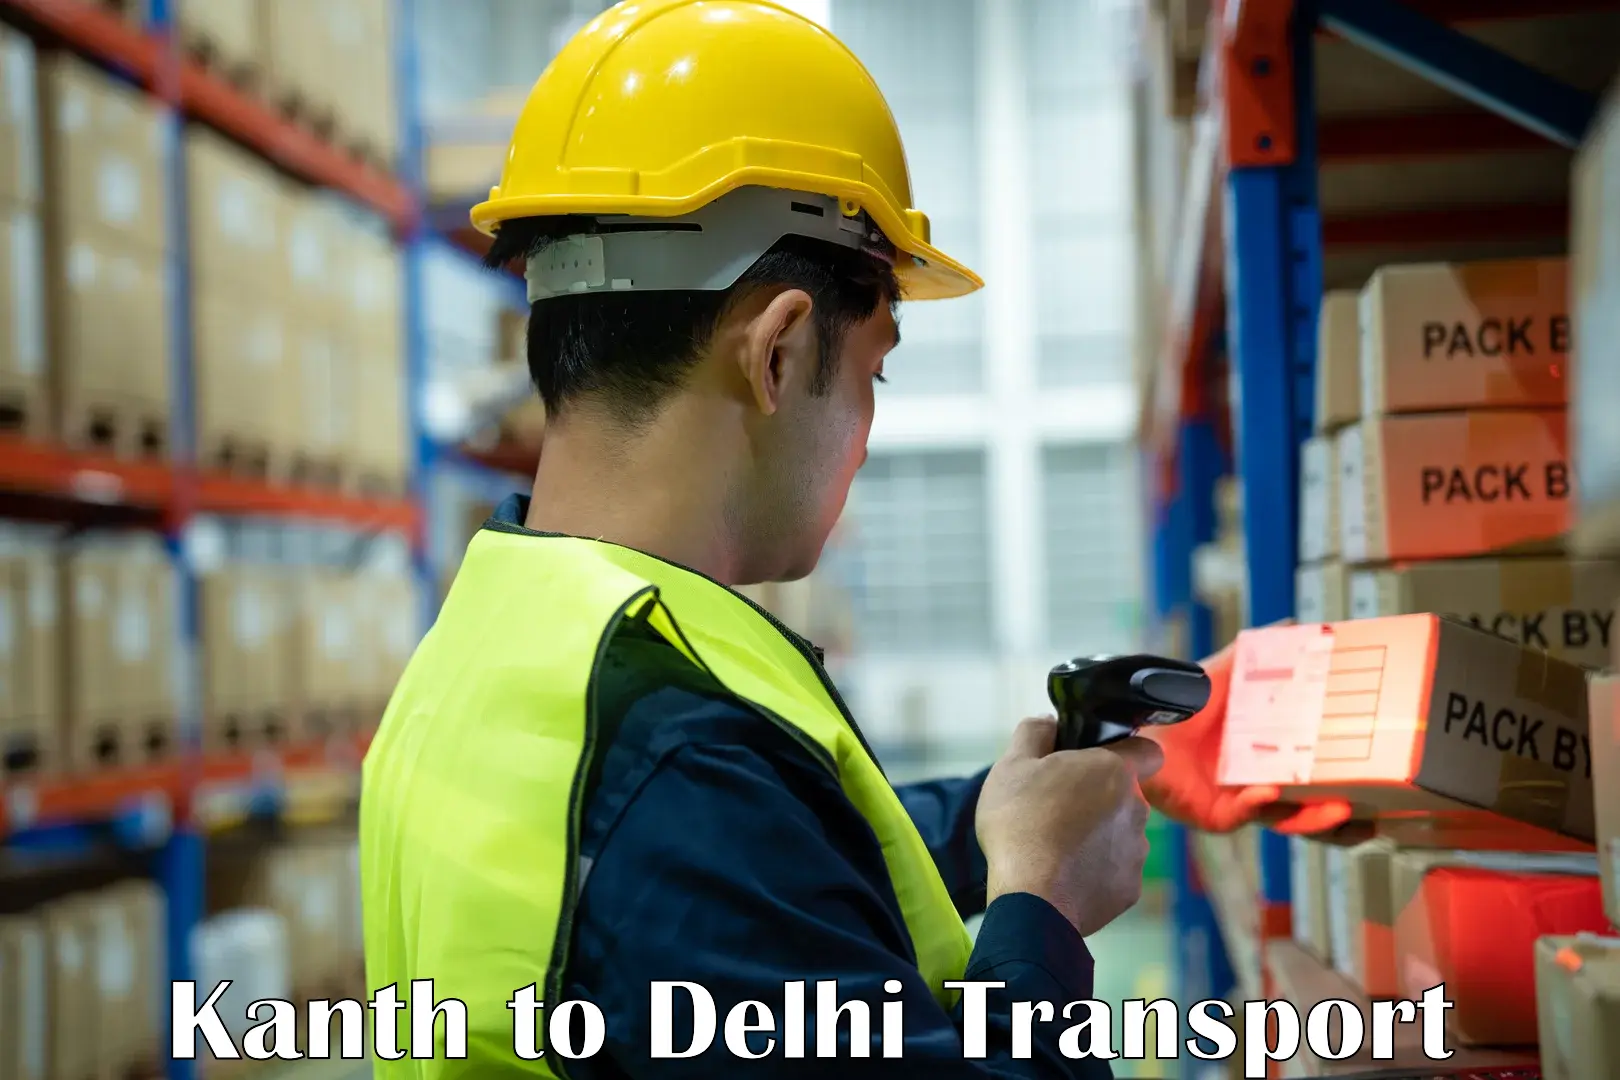 All India transport service Kanth to Delhi